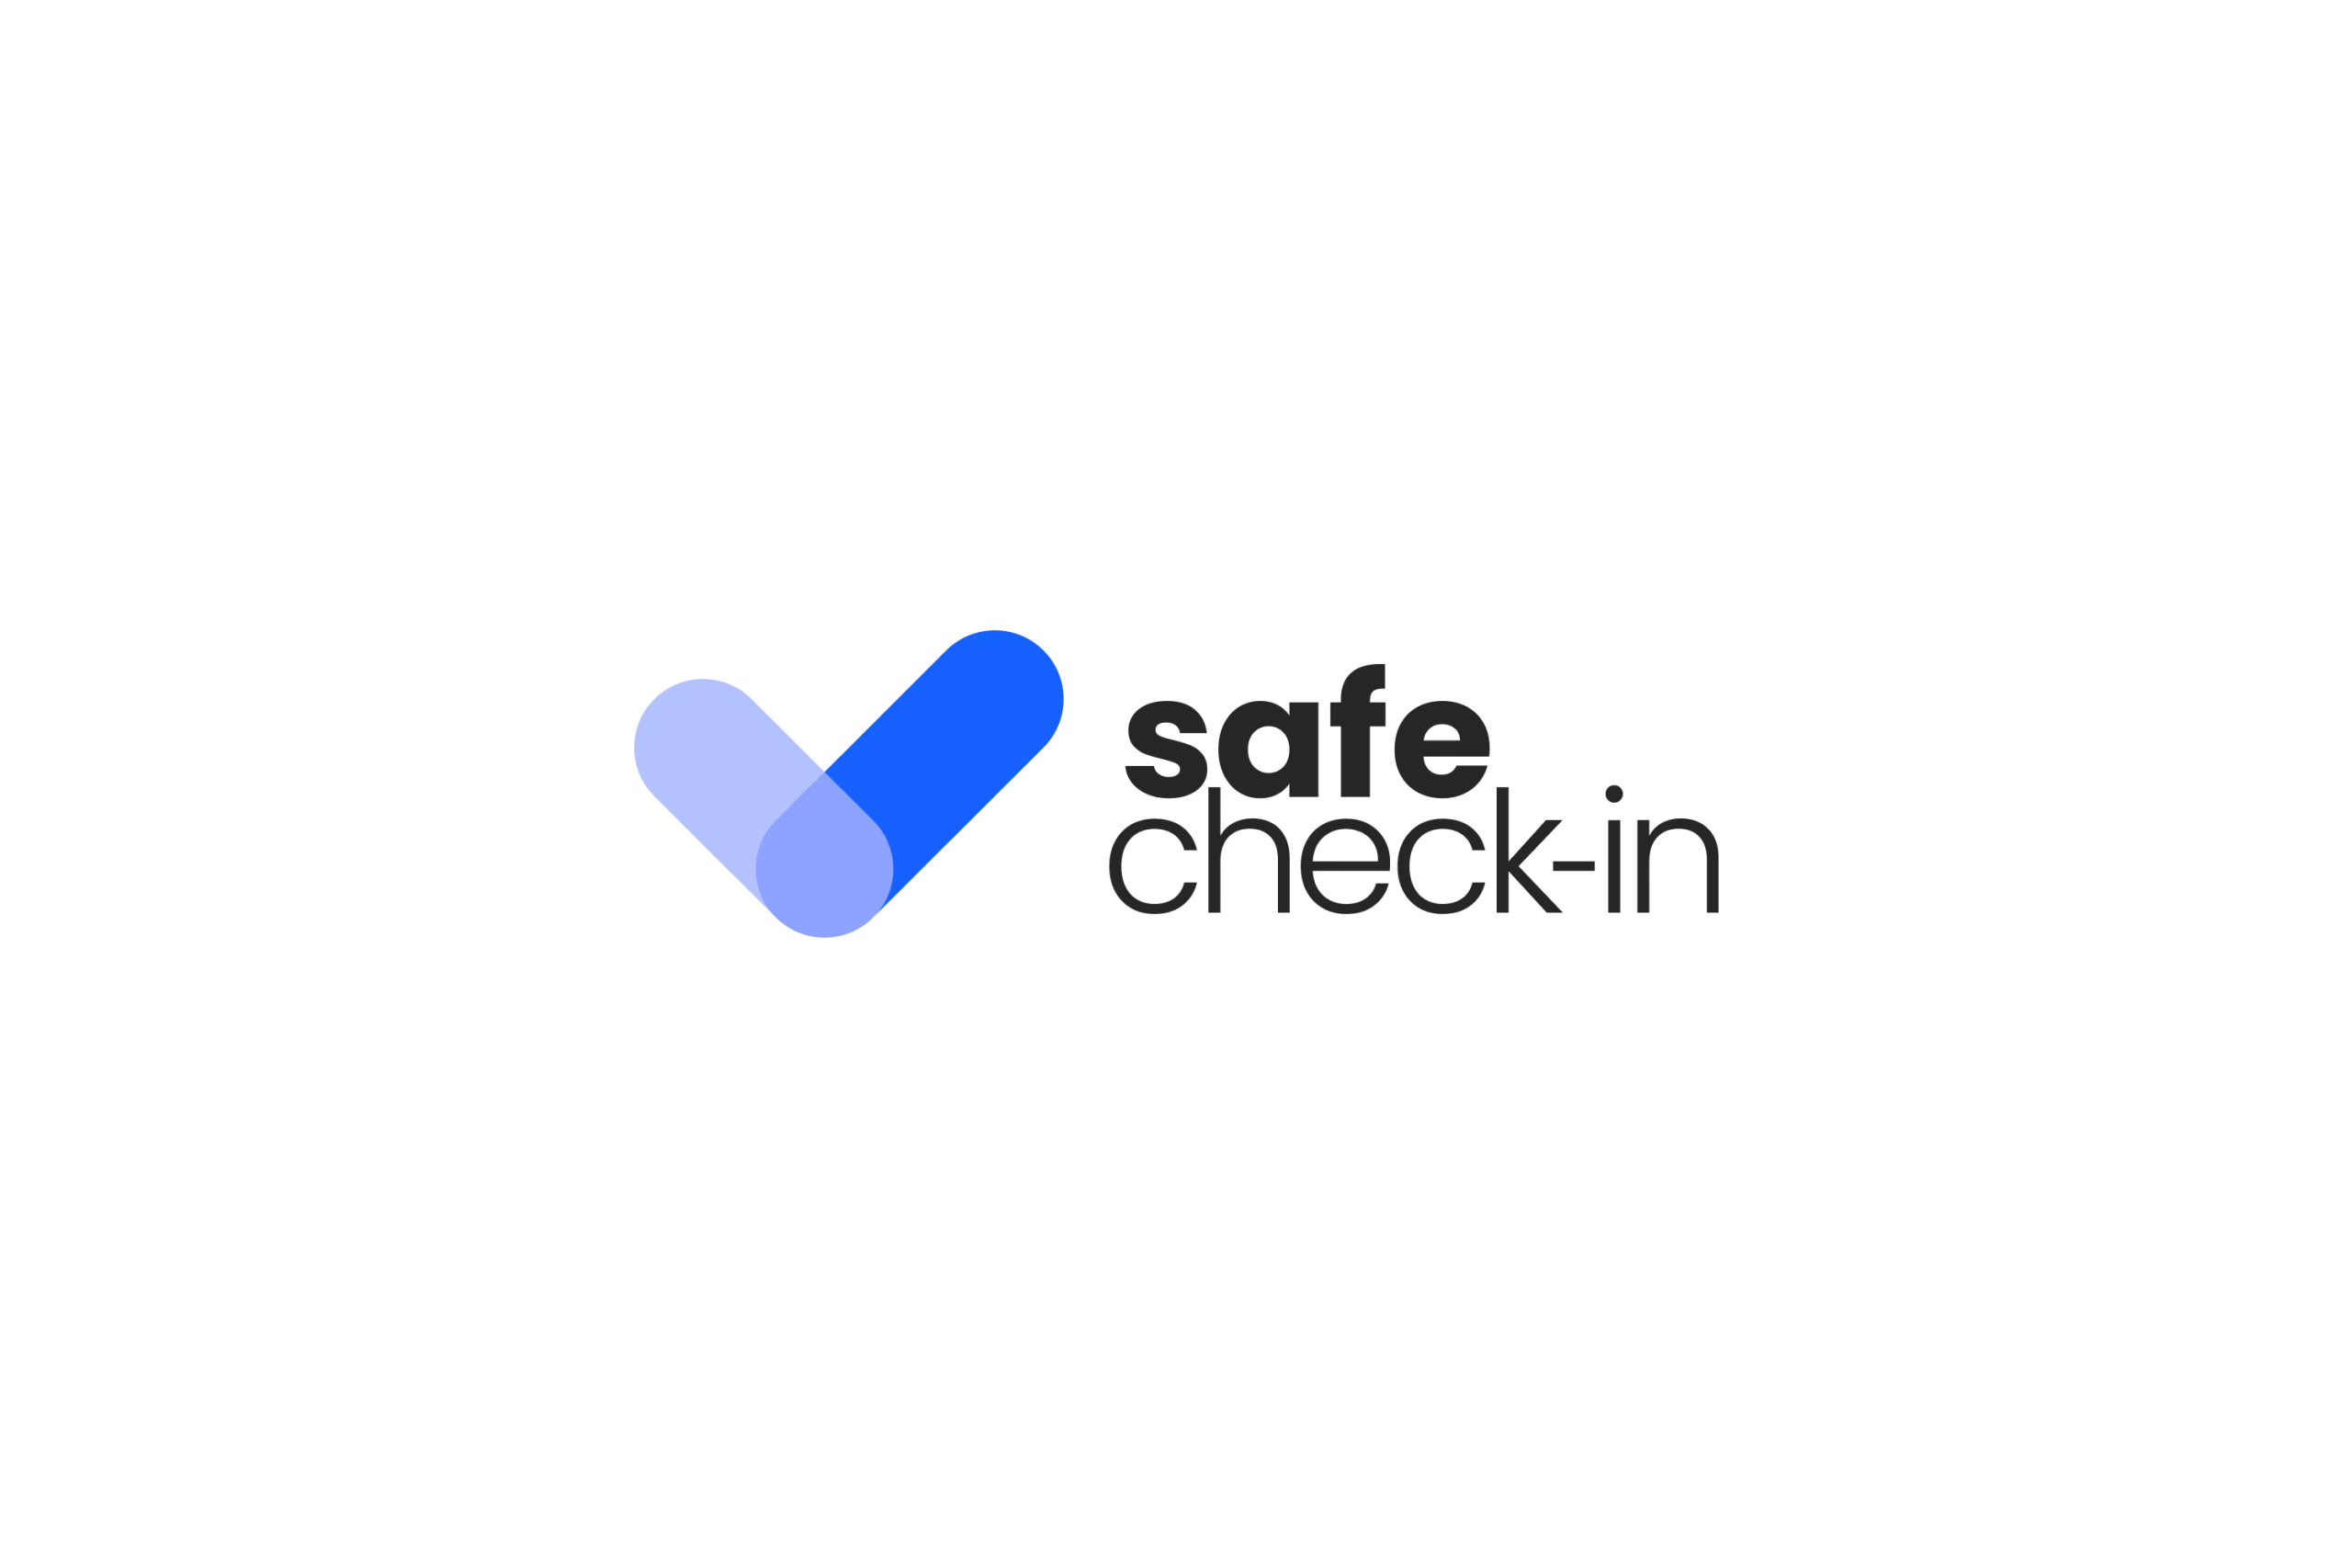 Cover Safe Check-in